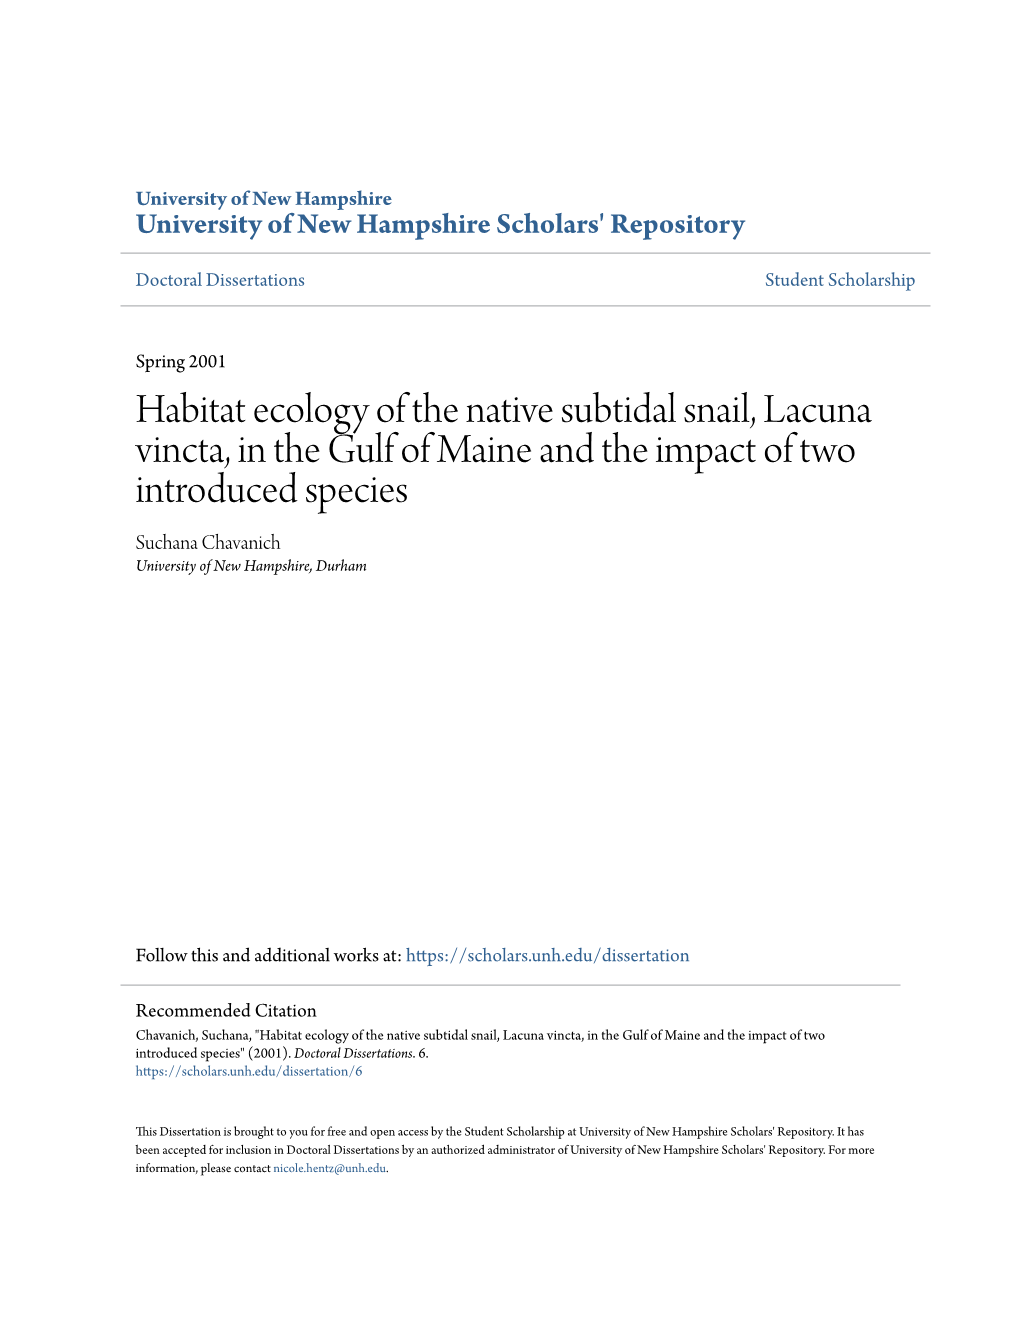 Habitat Ecology of the Native Subtidal Snail, Lacuna Vincta, in the Gulf Of